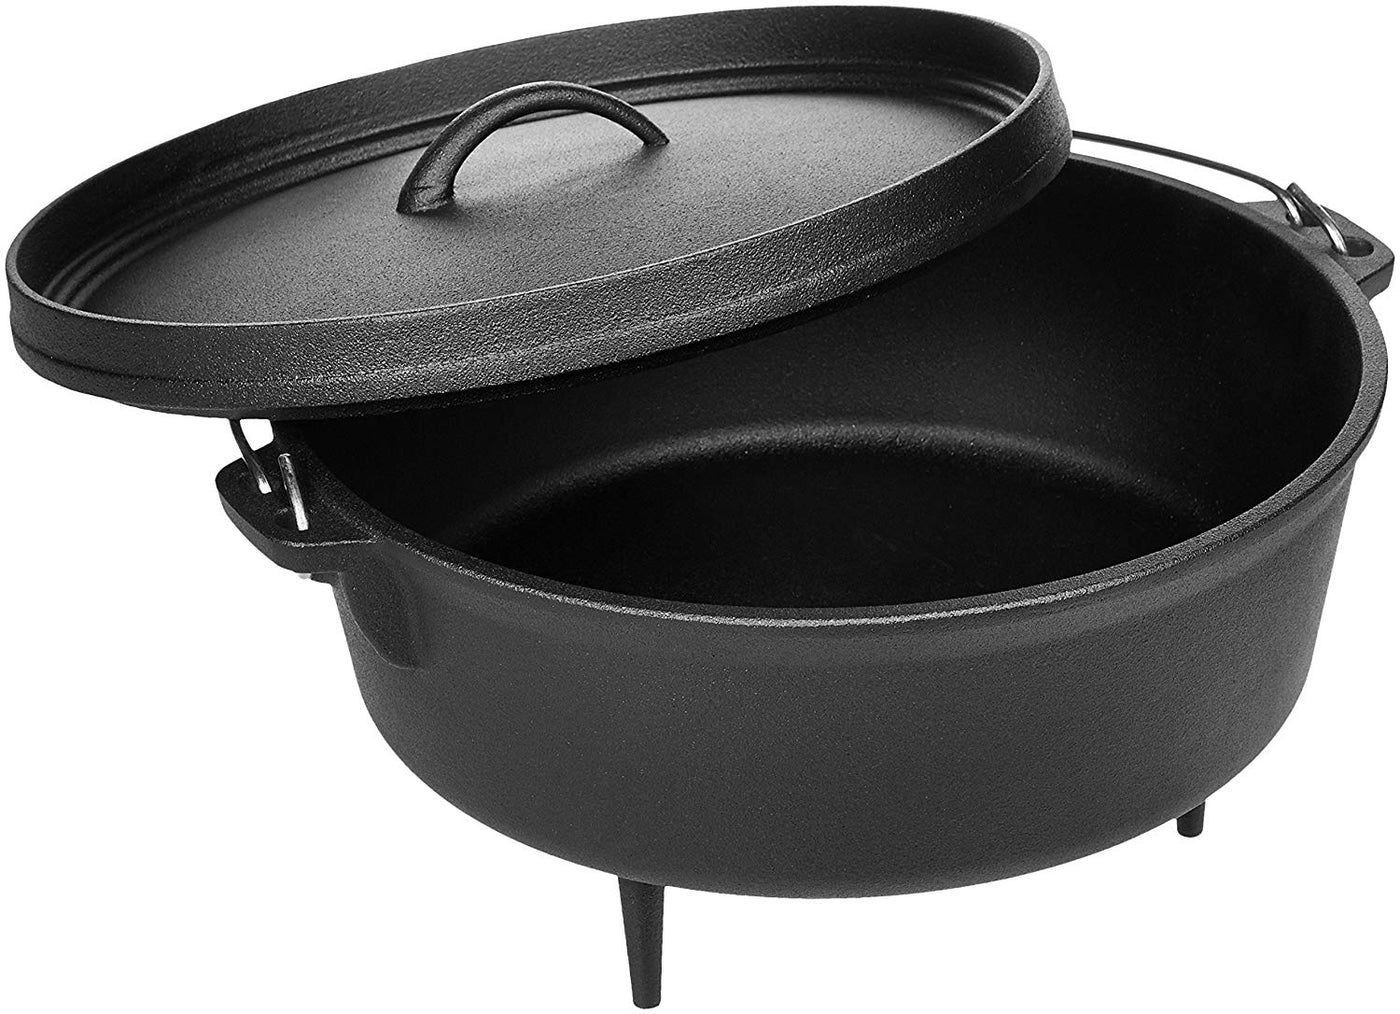 Cast Iron Camp Dutch Oven with Legs - 4.1 qt (3.9 L), Including Lid Lifter and Lid Stand